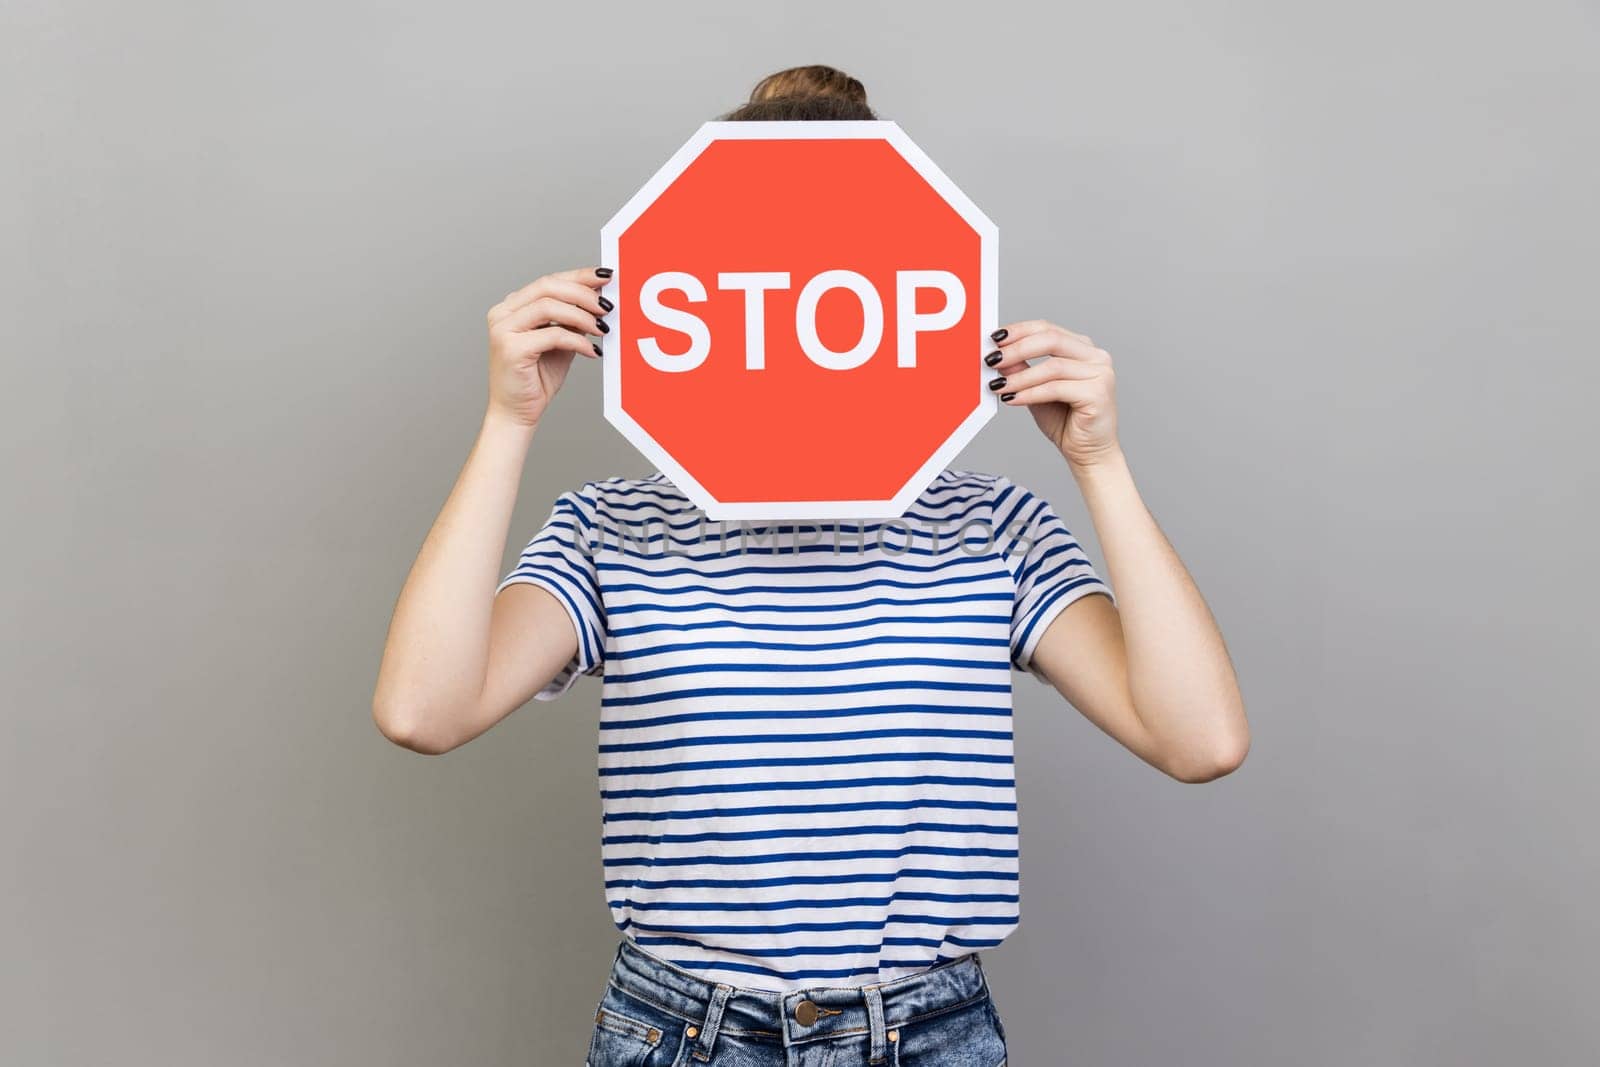 Portrait of woman wearing striped T-shirt hiding her face behind stop sign, afraid talking about domestic violence, scared victim. Indoor studio shot isolated on gray background.